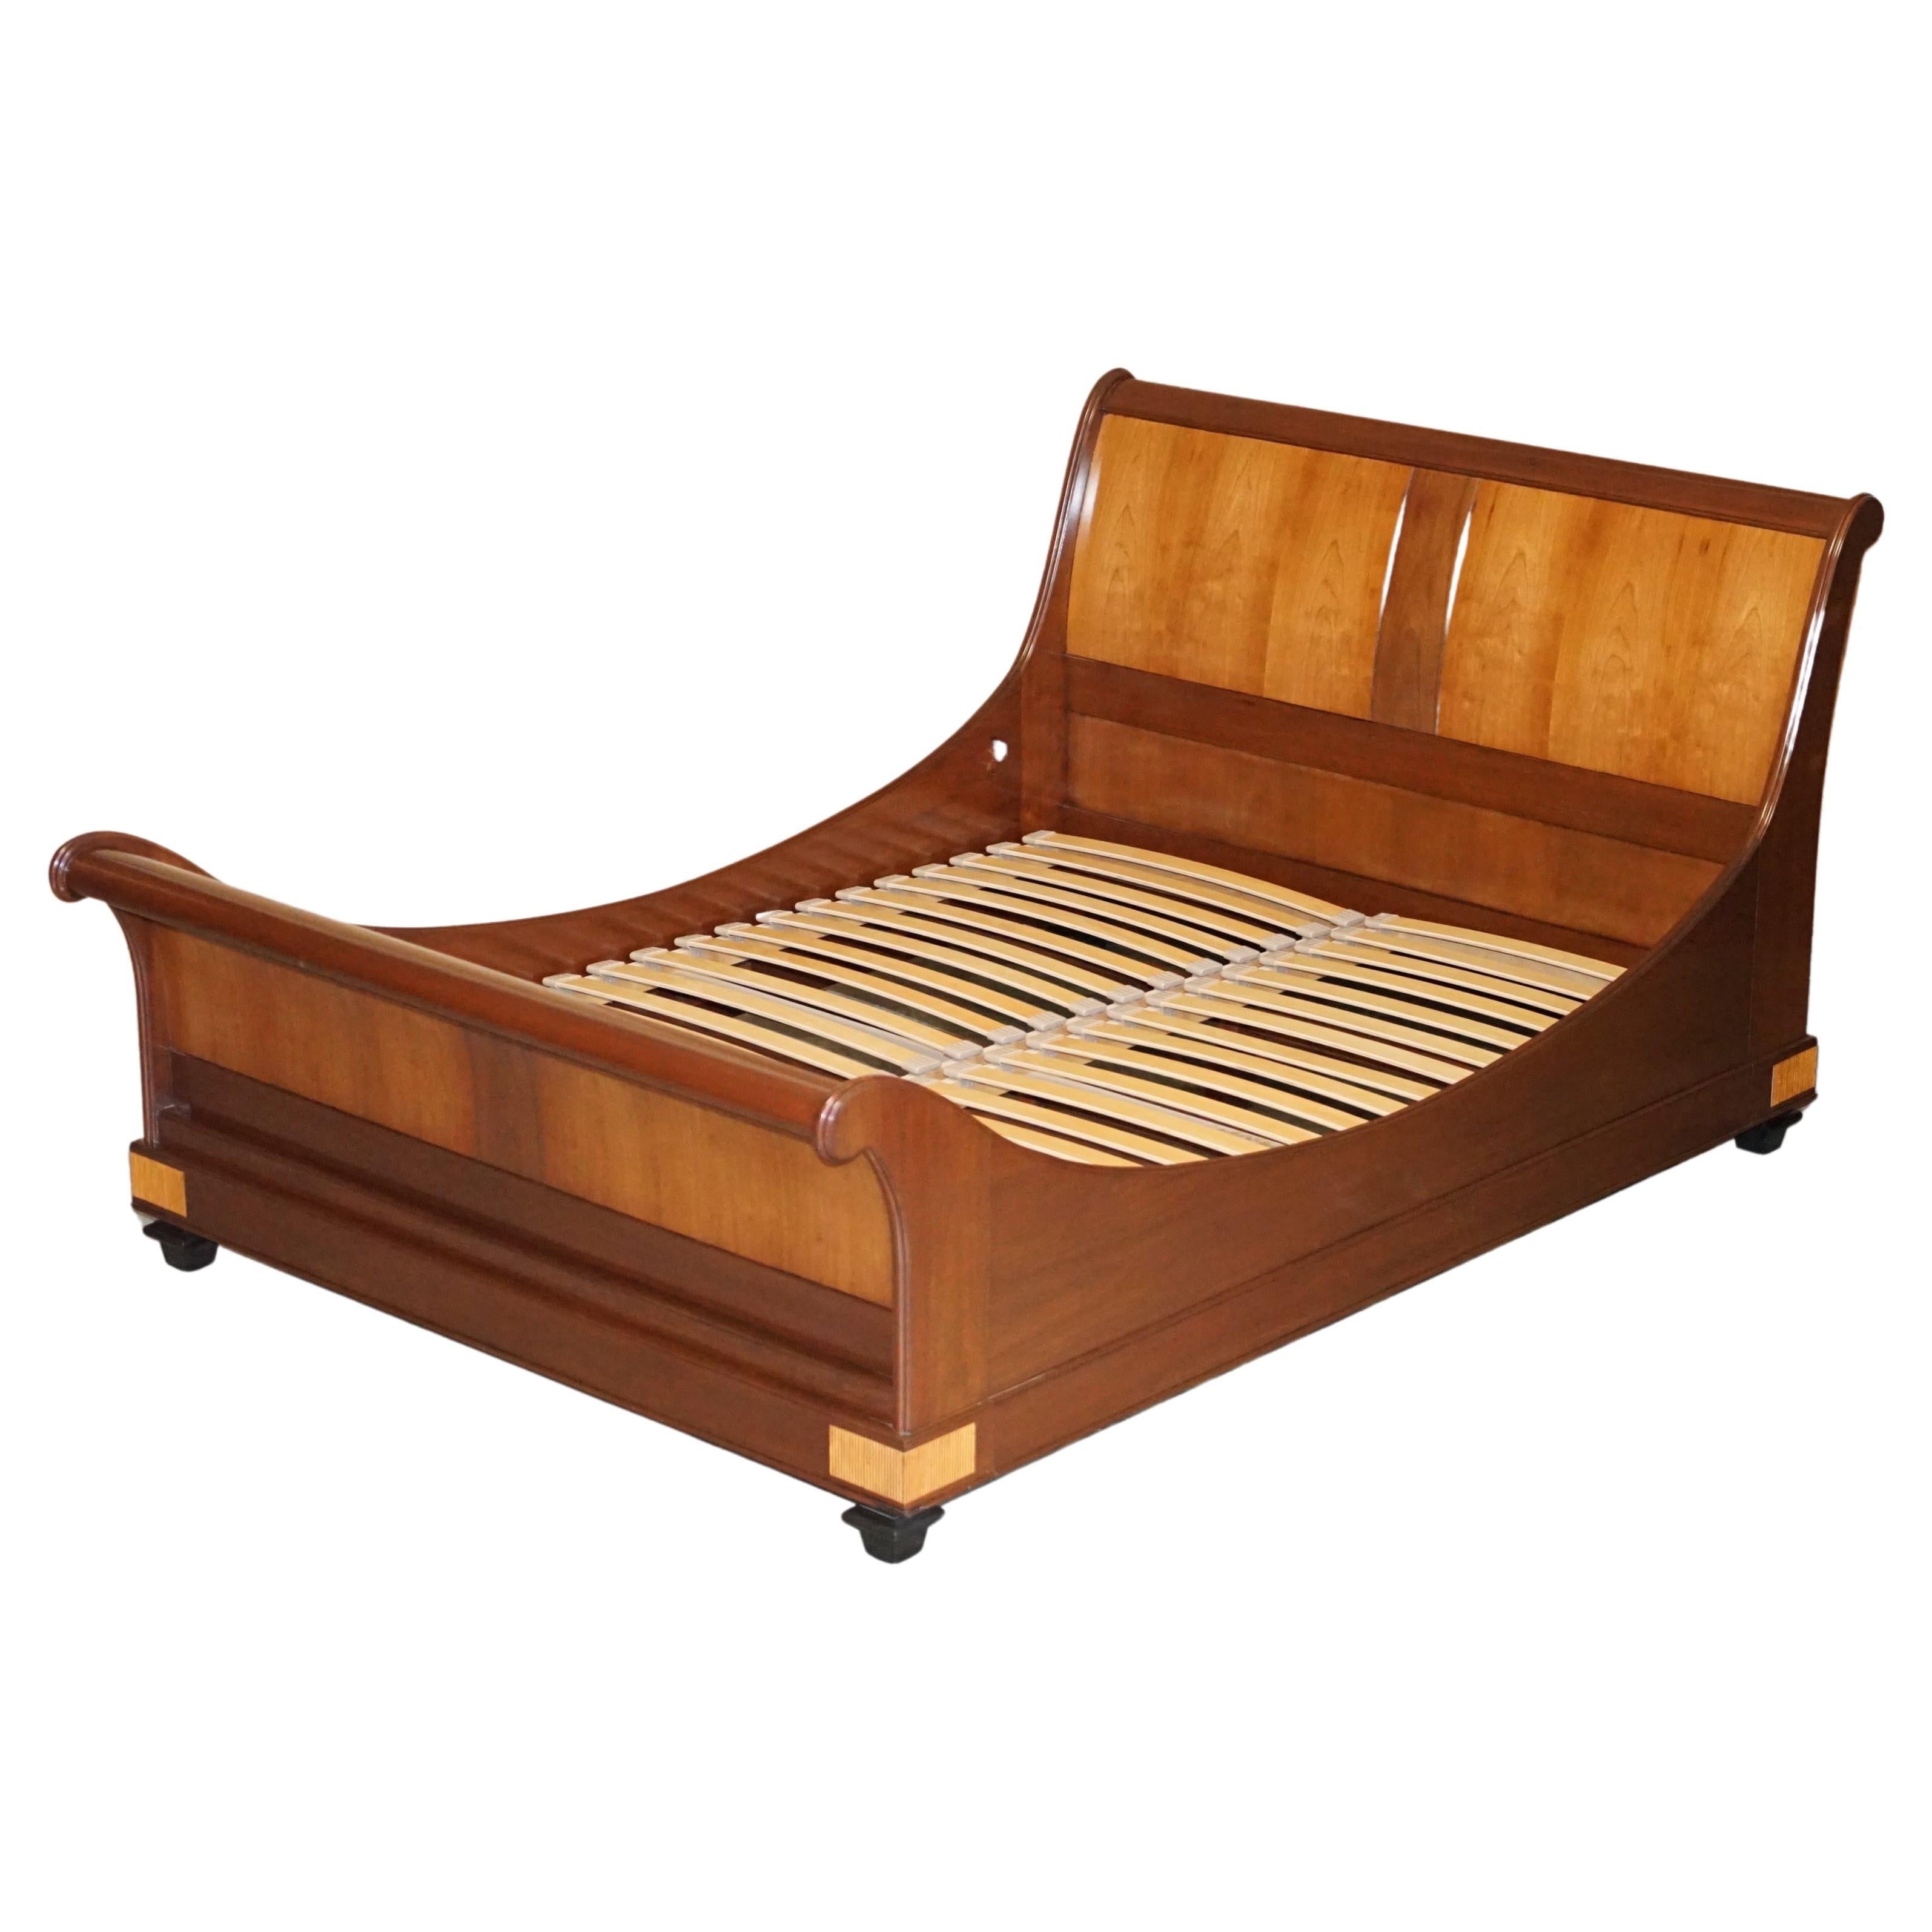 Bed Palais Sleigh King Size, Cherry Sleigh Bed Frame